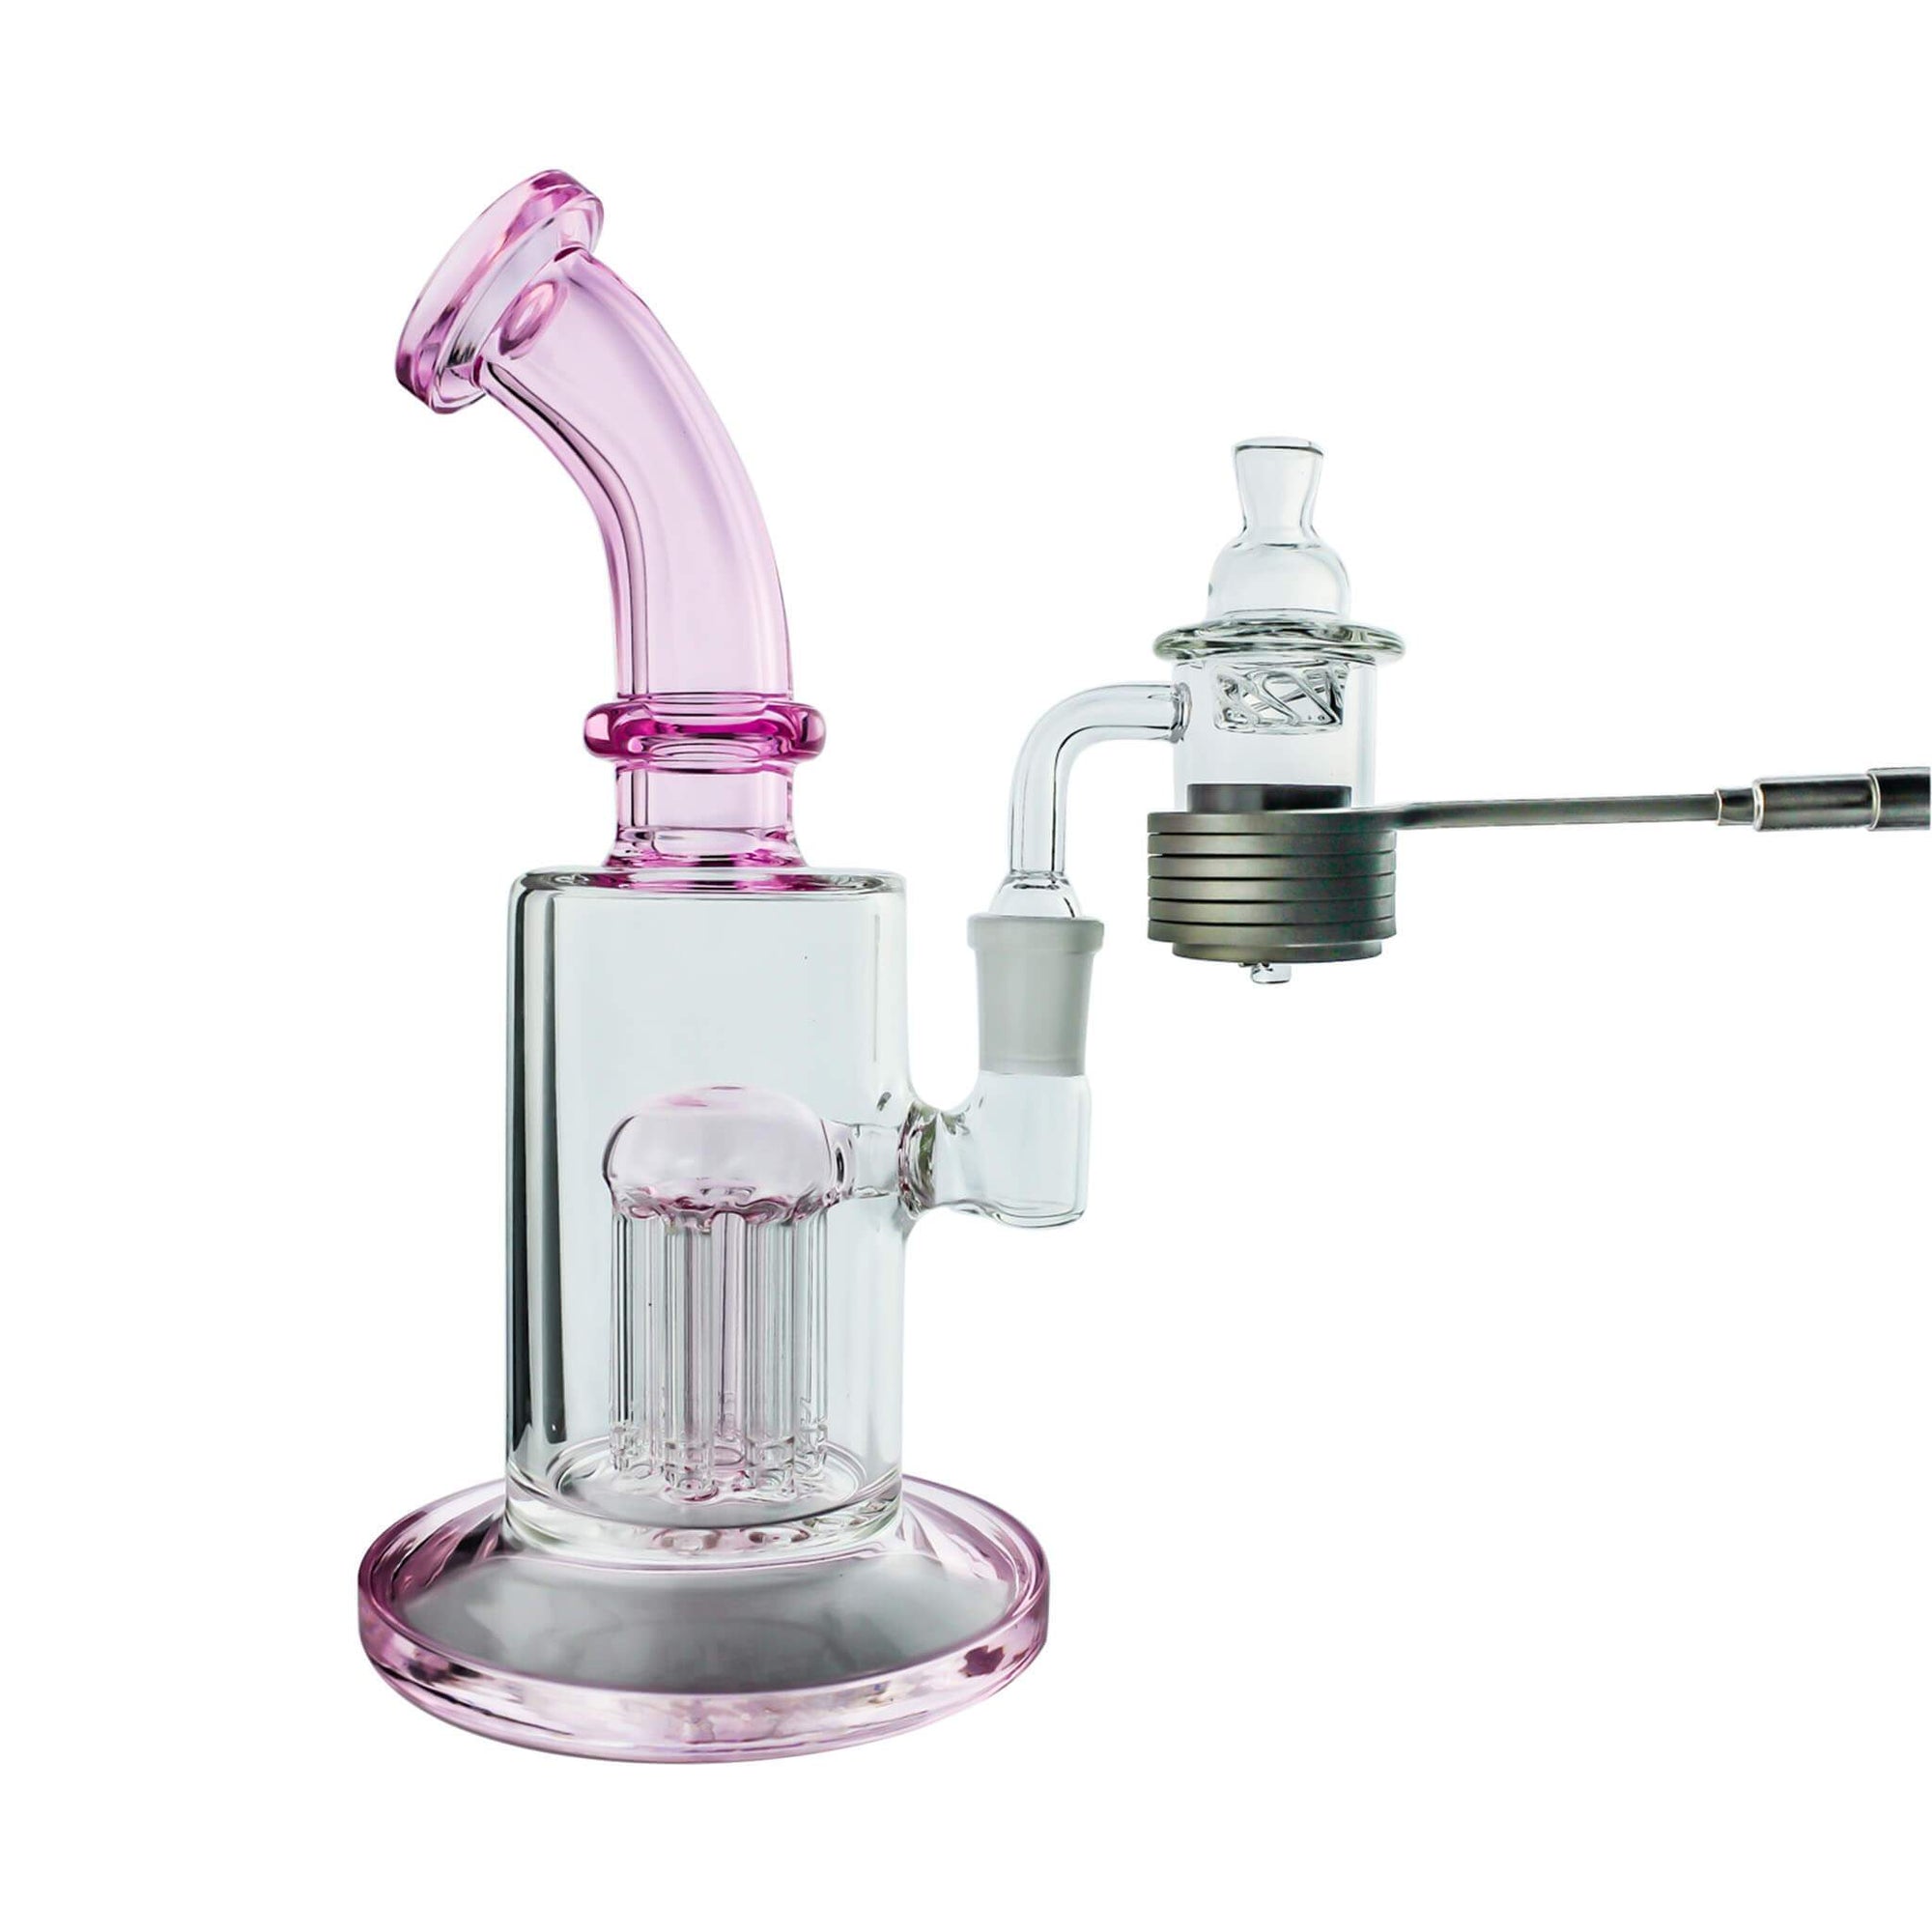 Spin Matrix 30mm Enail Complete Dabbing Enail Kit #1 | Complete Kit View | the dabbing specialists